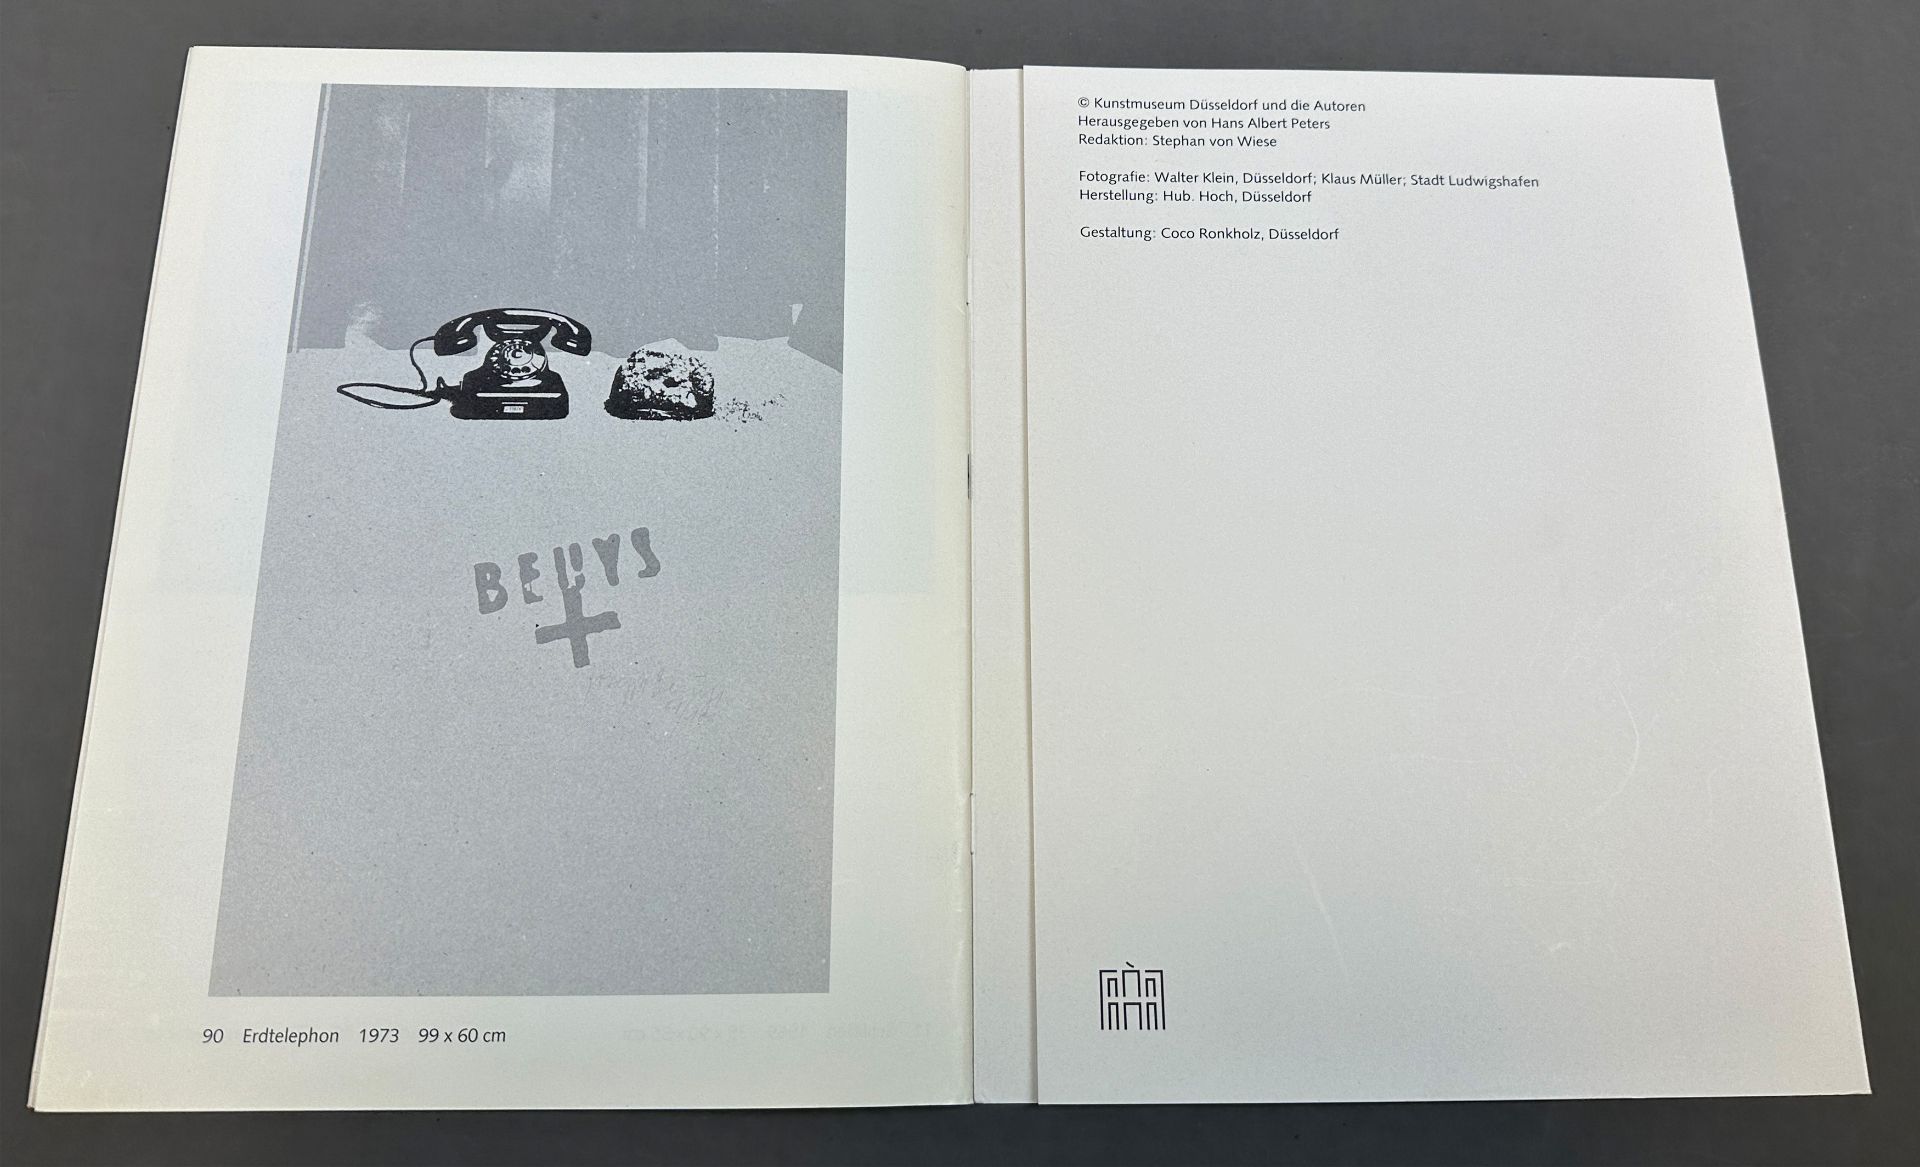 Joseph BEUYS (1921 - 1986). Exhibition catalogue signed by hand. Multiplied Art 1965-1980. - Image 5 of 5